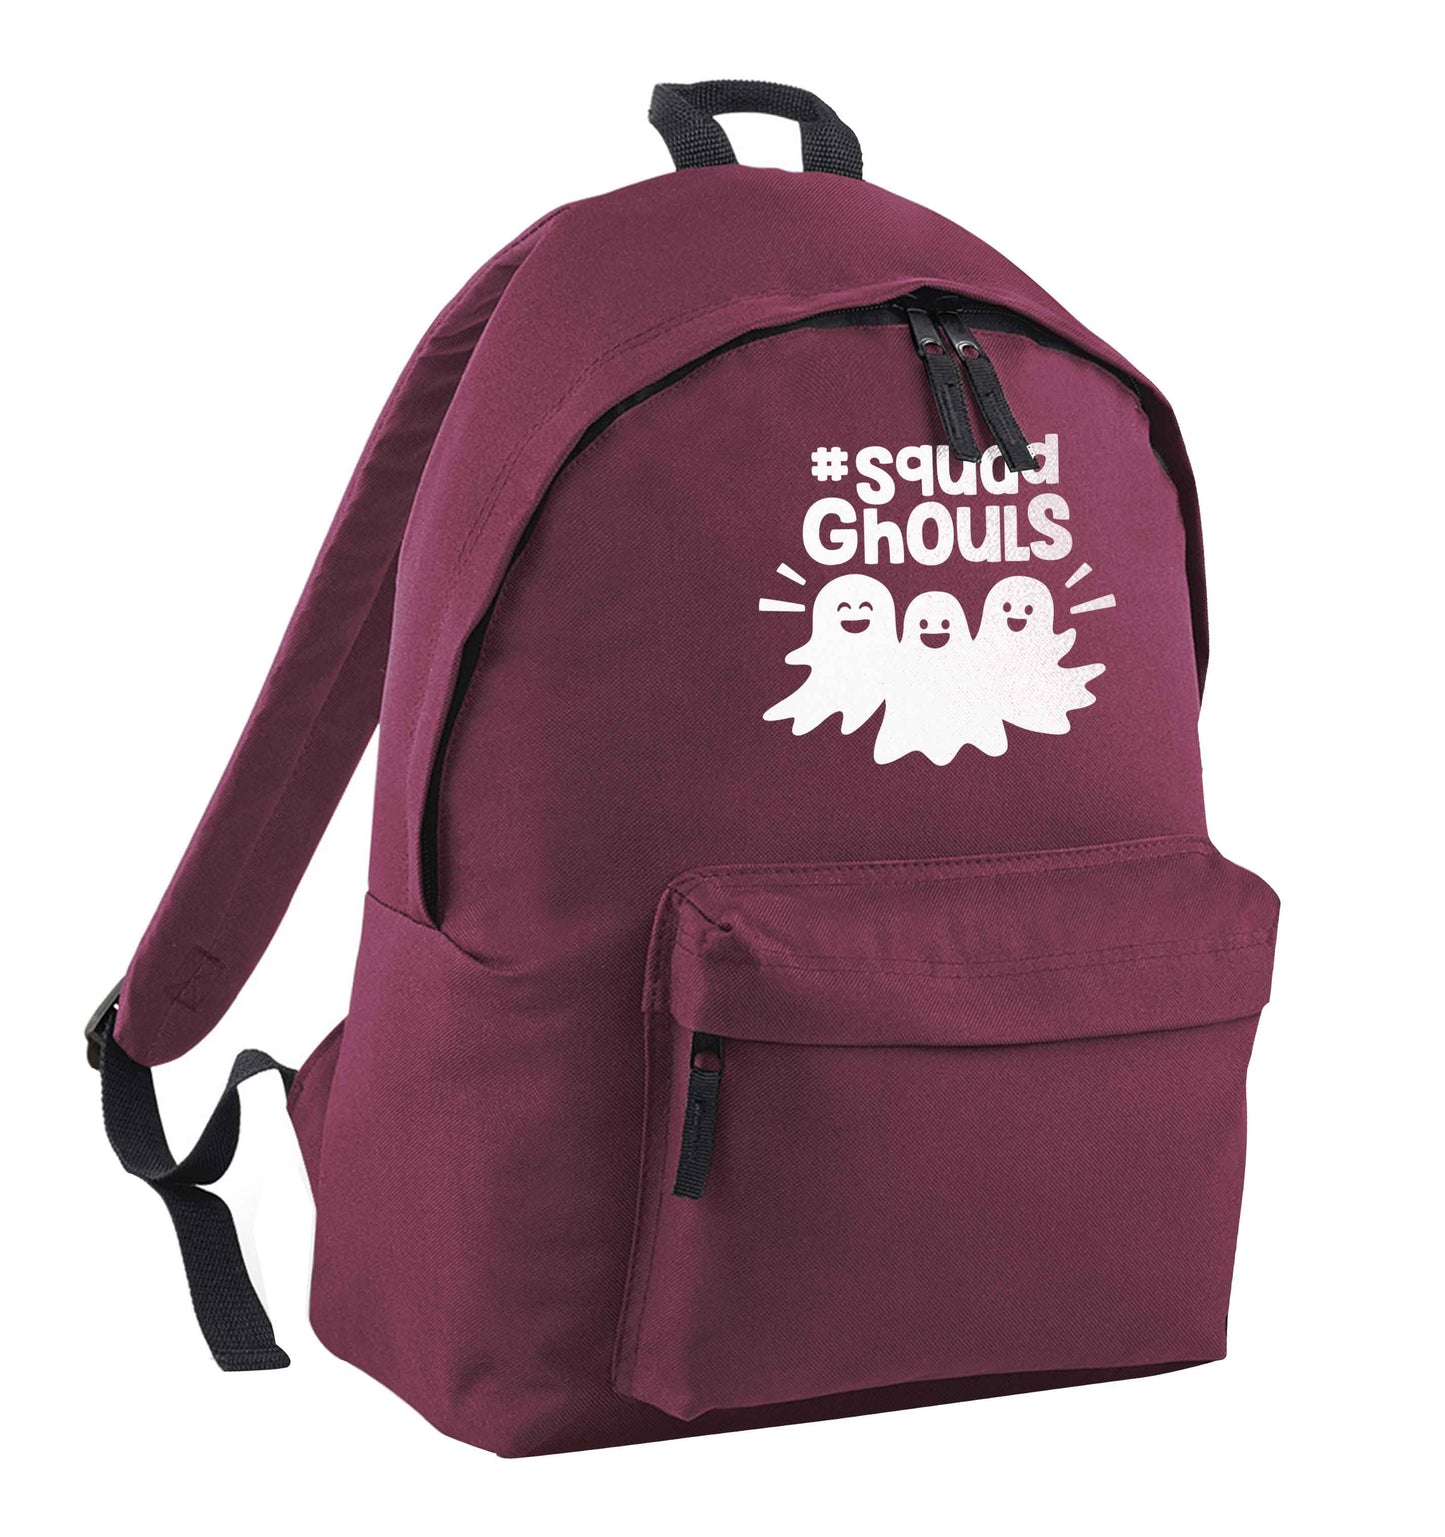 Squad ghouls Kit maroon children's backpack